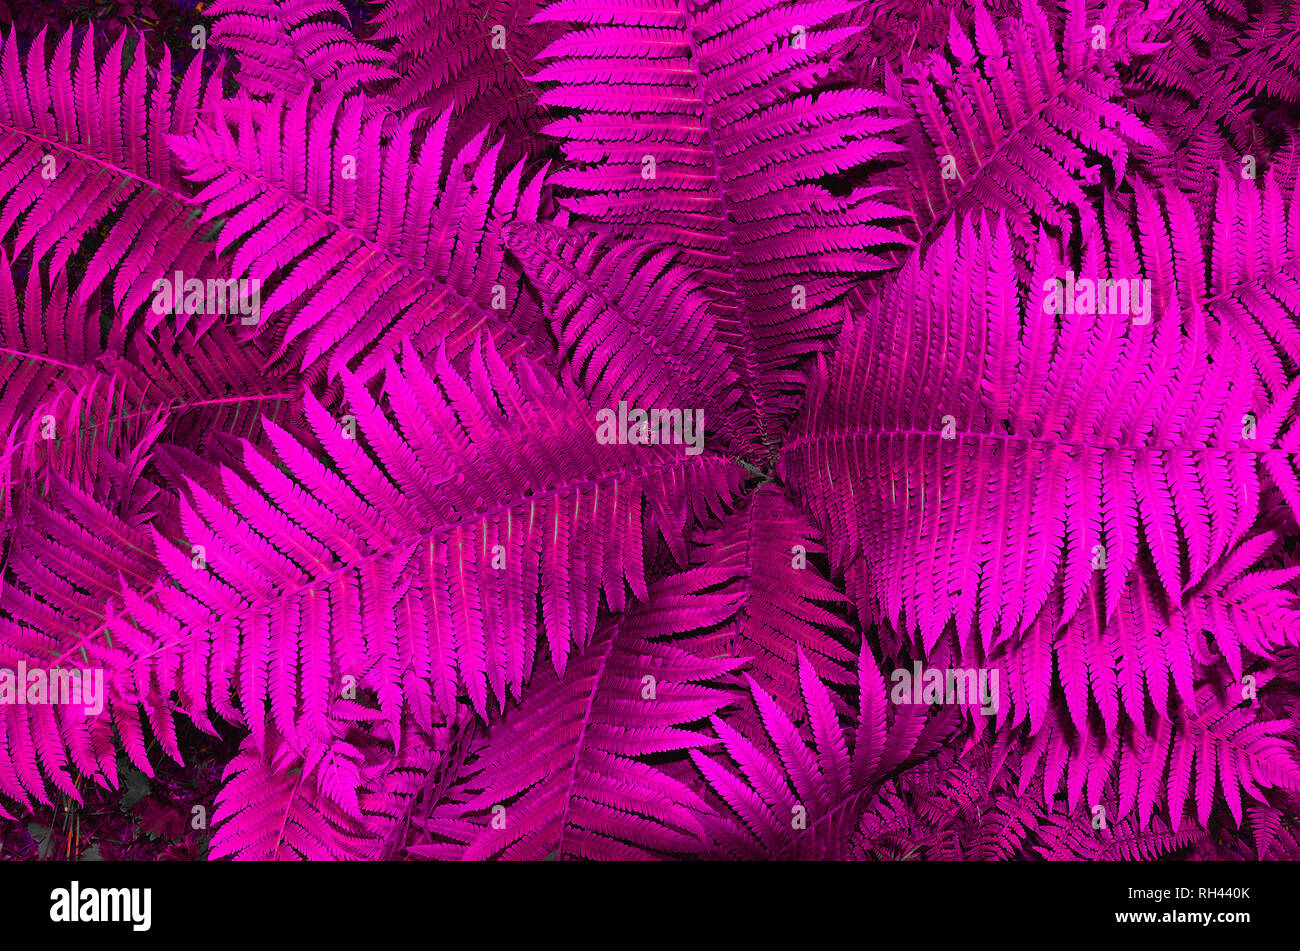 Beautiful fern or bracken leaves texture close up. Natural floral fern foliage background, colored in vivid, creative and positive intensive purple-pi Stock Photo